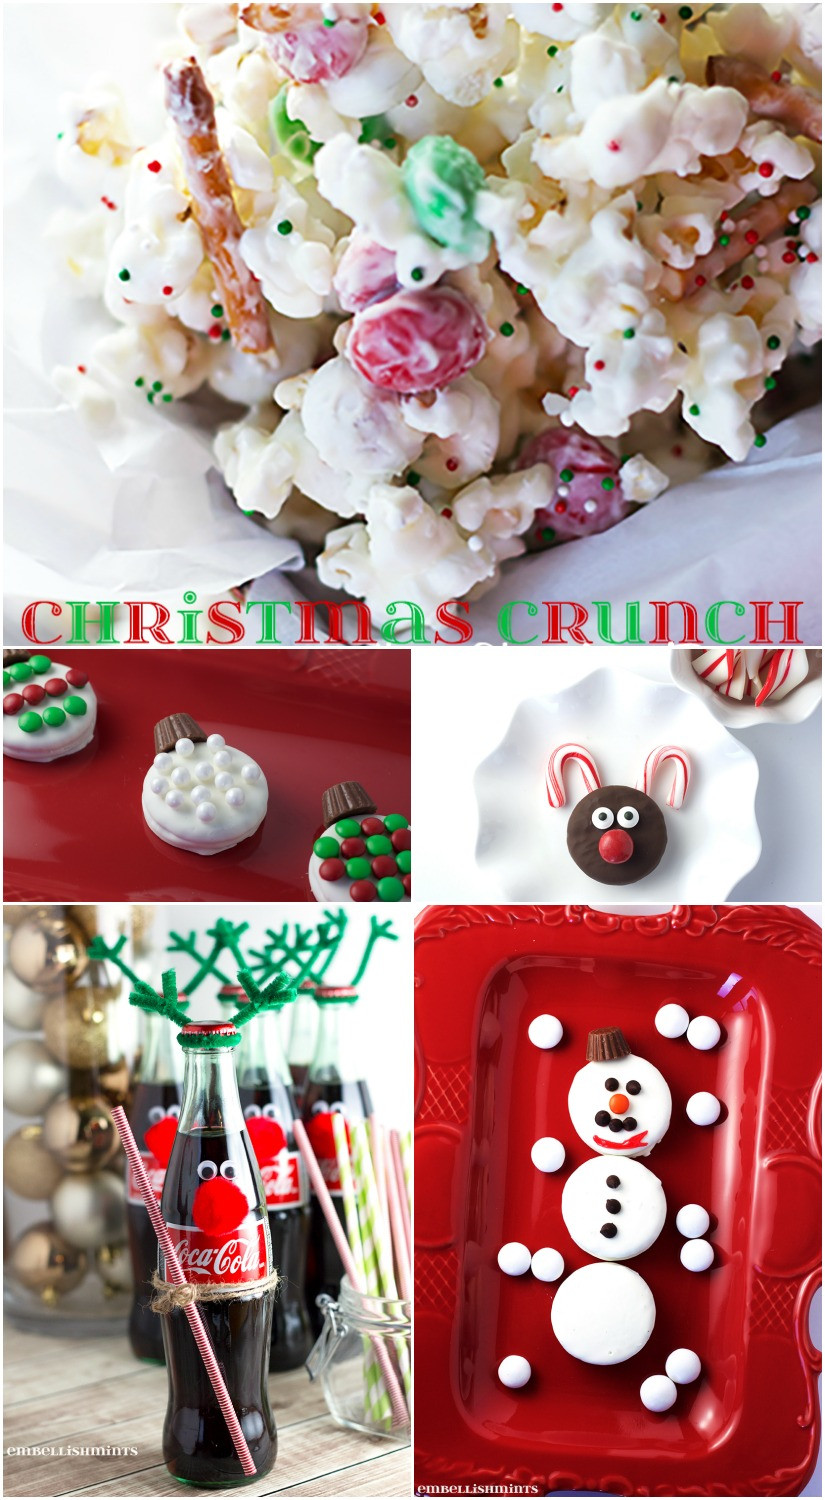 Children Christmas Party Food
 Christmas Party Food Ideas For Kids Embellishmints